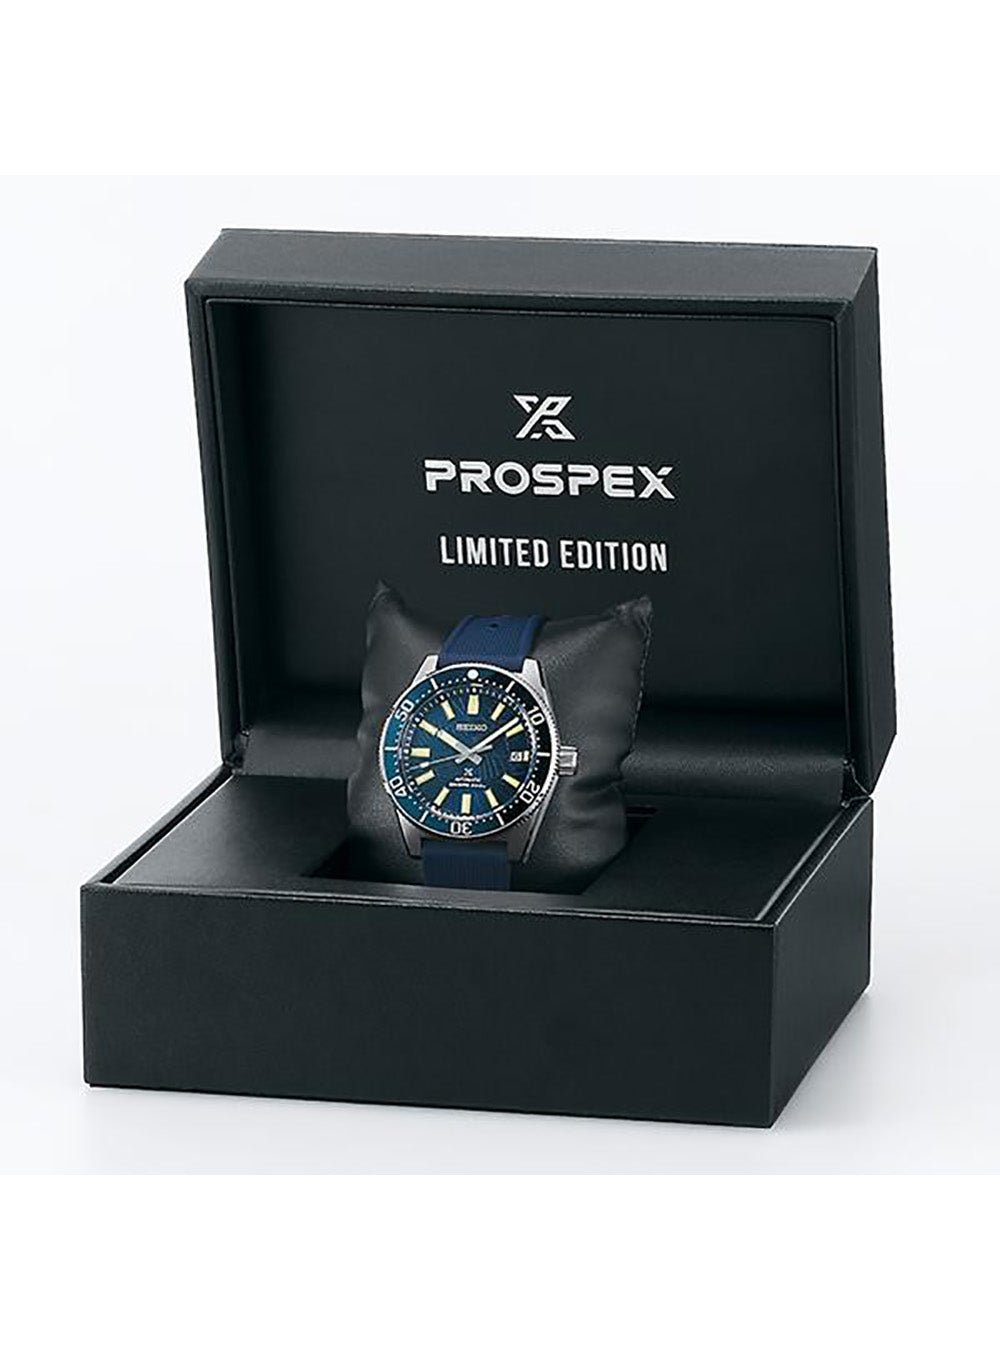 SEIKO PROSPEX DIVER SCUBA SBDX053 / SLA065 SAVE THE OCEAN LIMITED EDITION 1965 DIVER'SMADE IN JAPAN JDMWRISTWATCHjapan-select